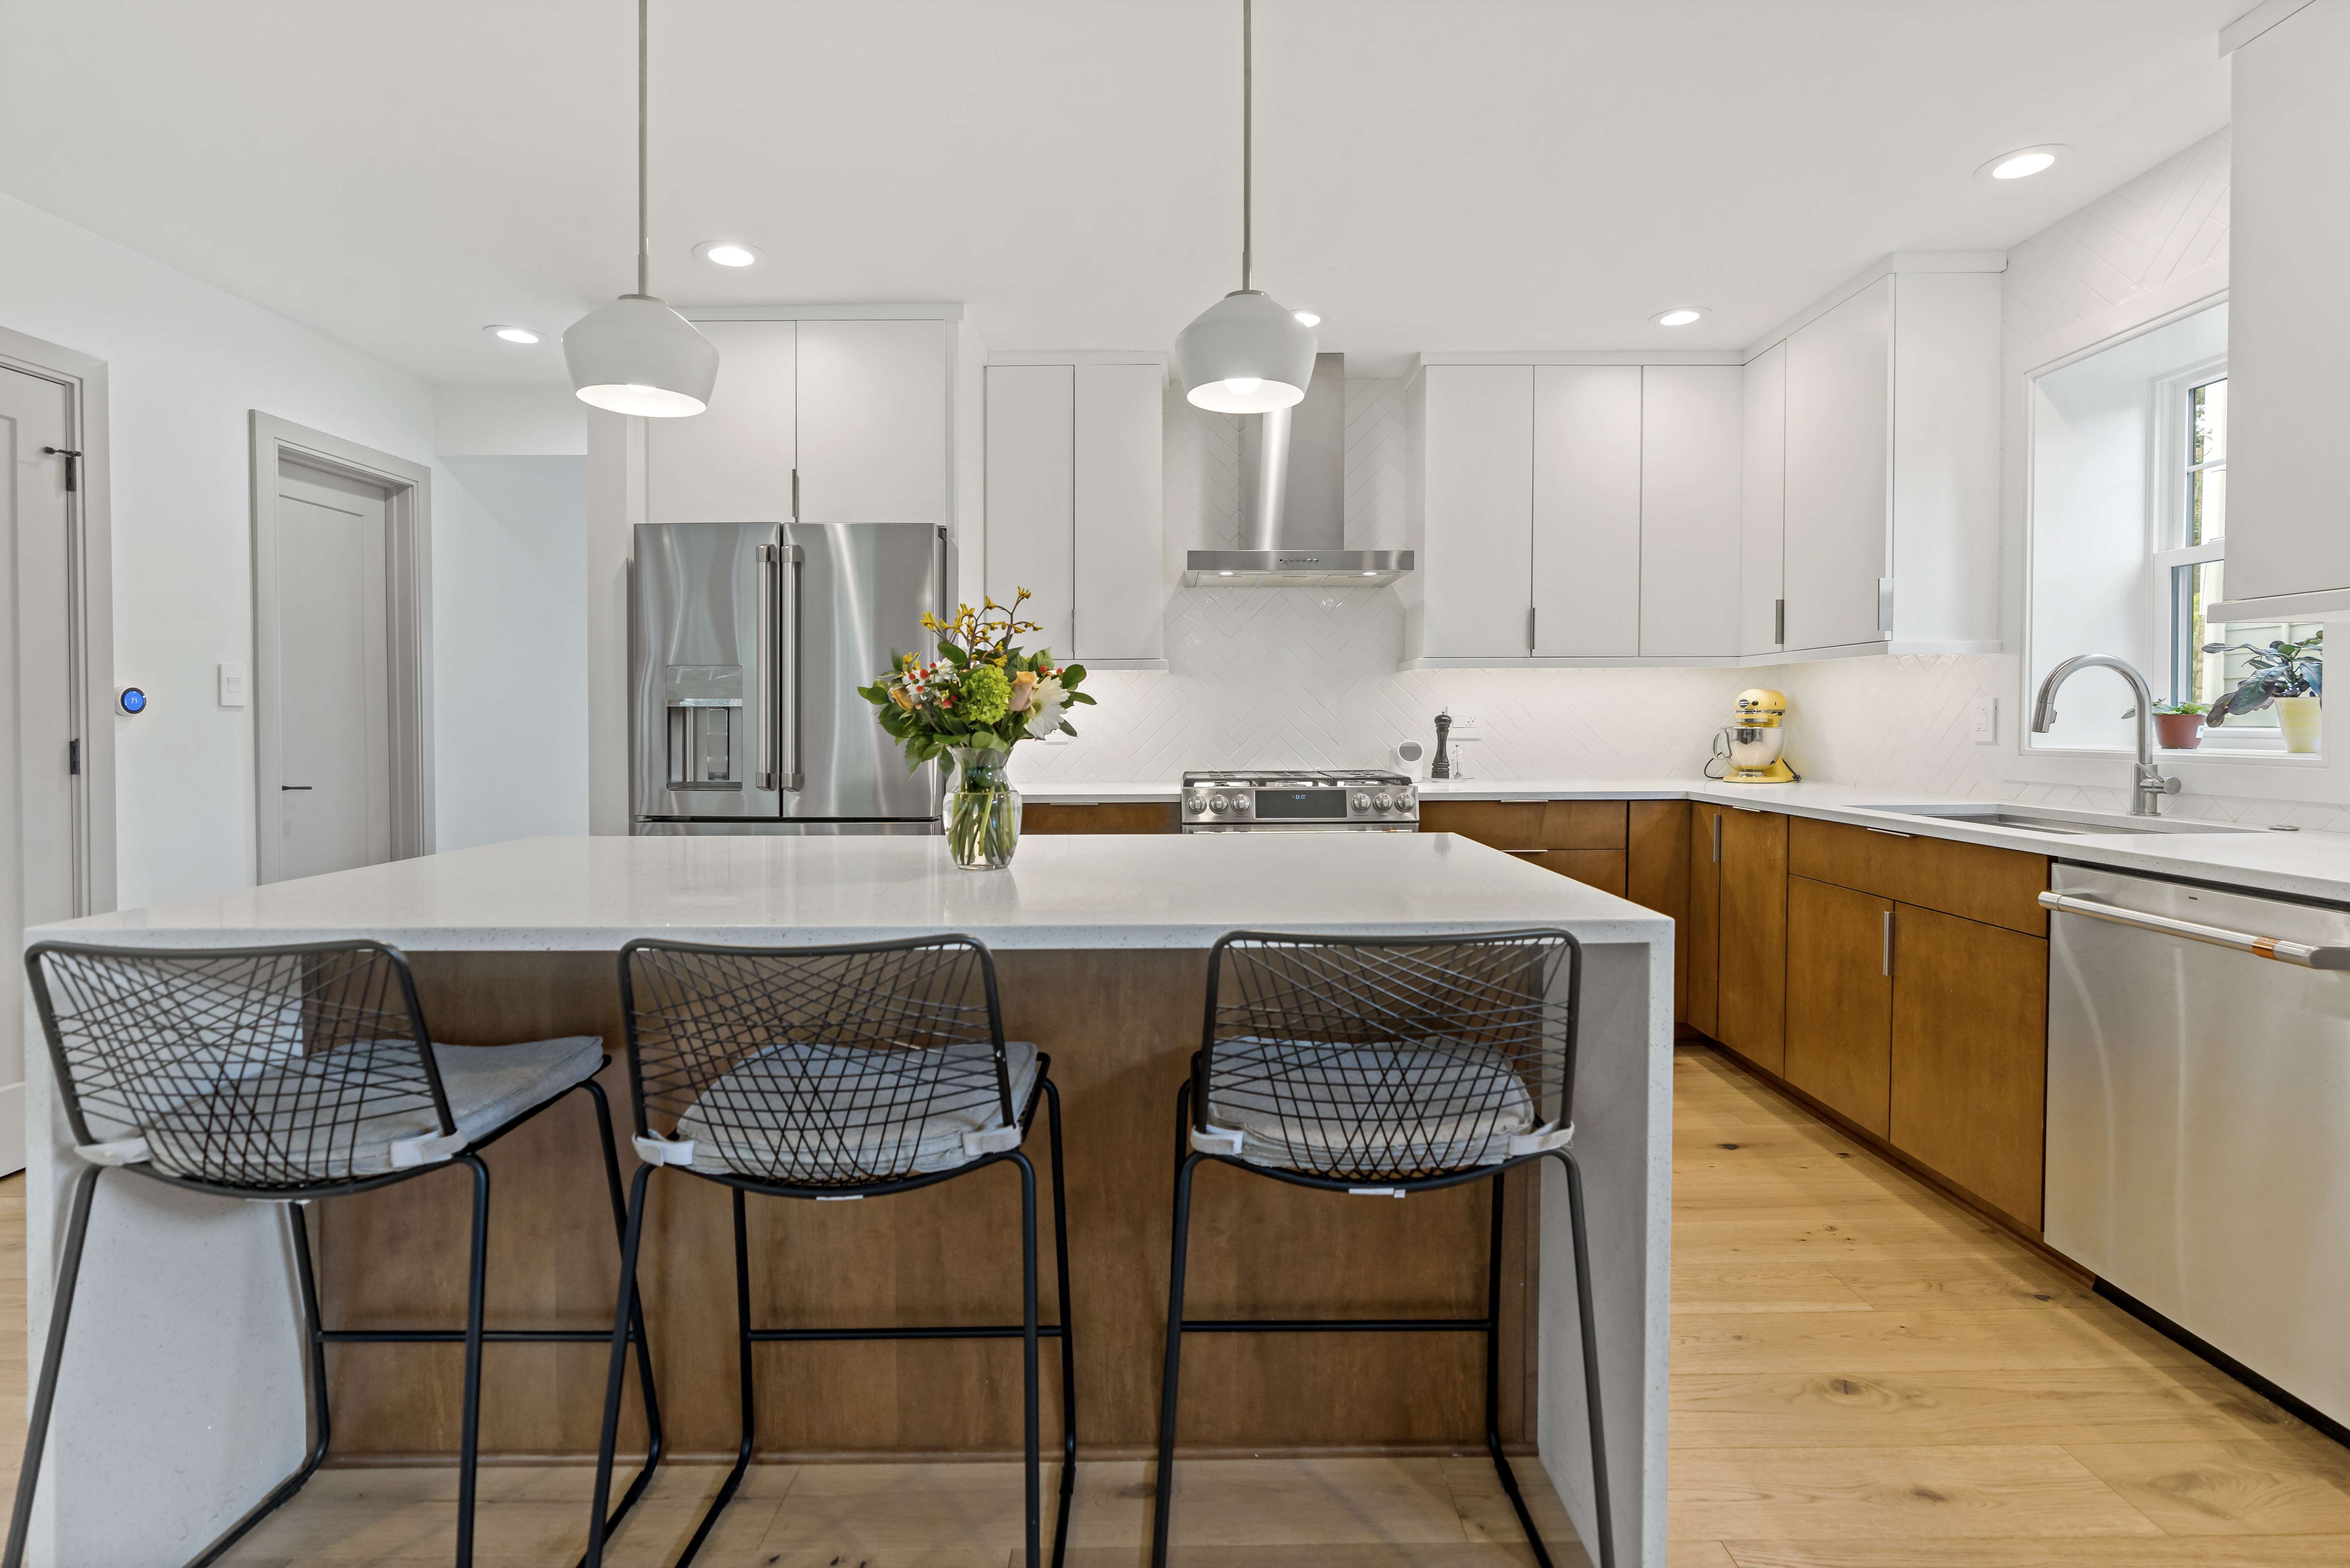 Large white counter kitchen island with two pendant lights above